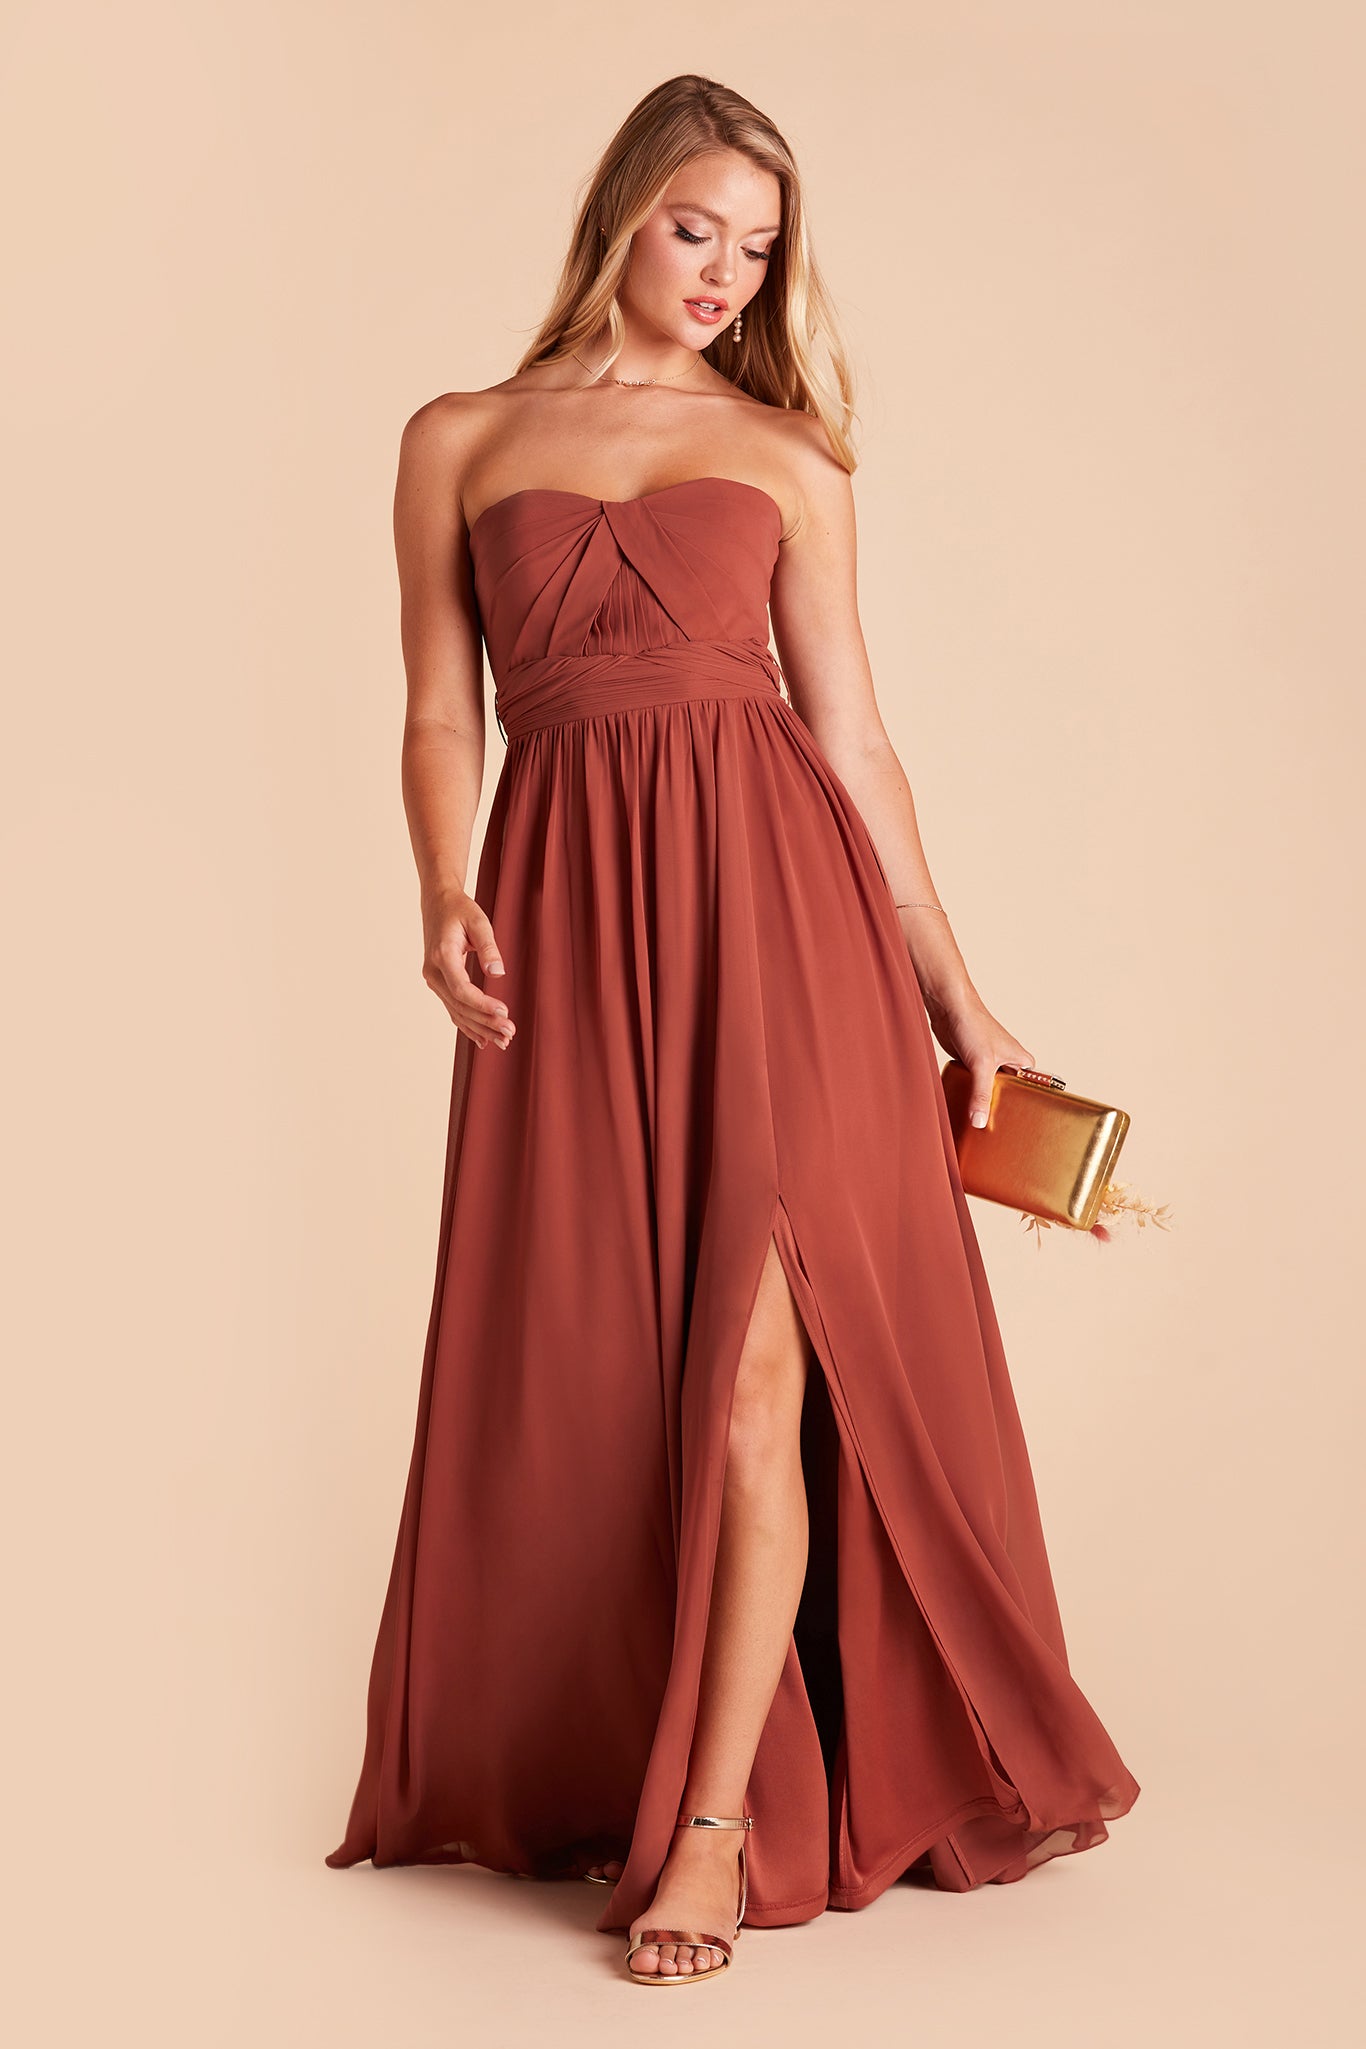 Grace convertible bridesmaid dress with slit in spice chiffon by Birdy Grey, front view with hand in pocket